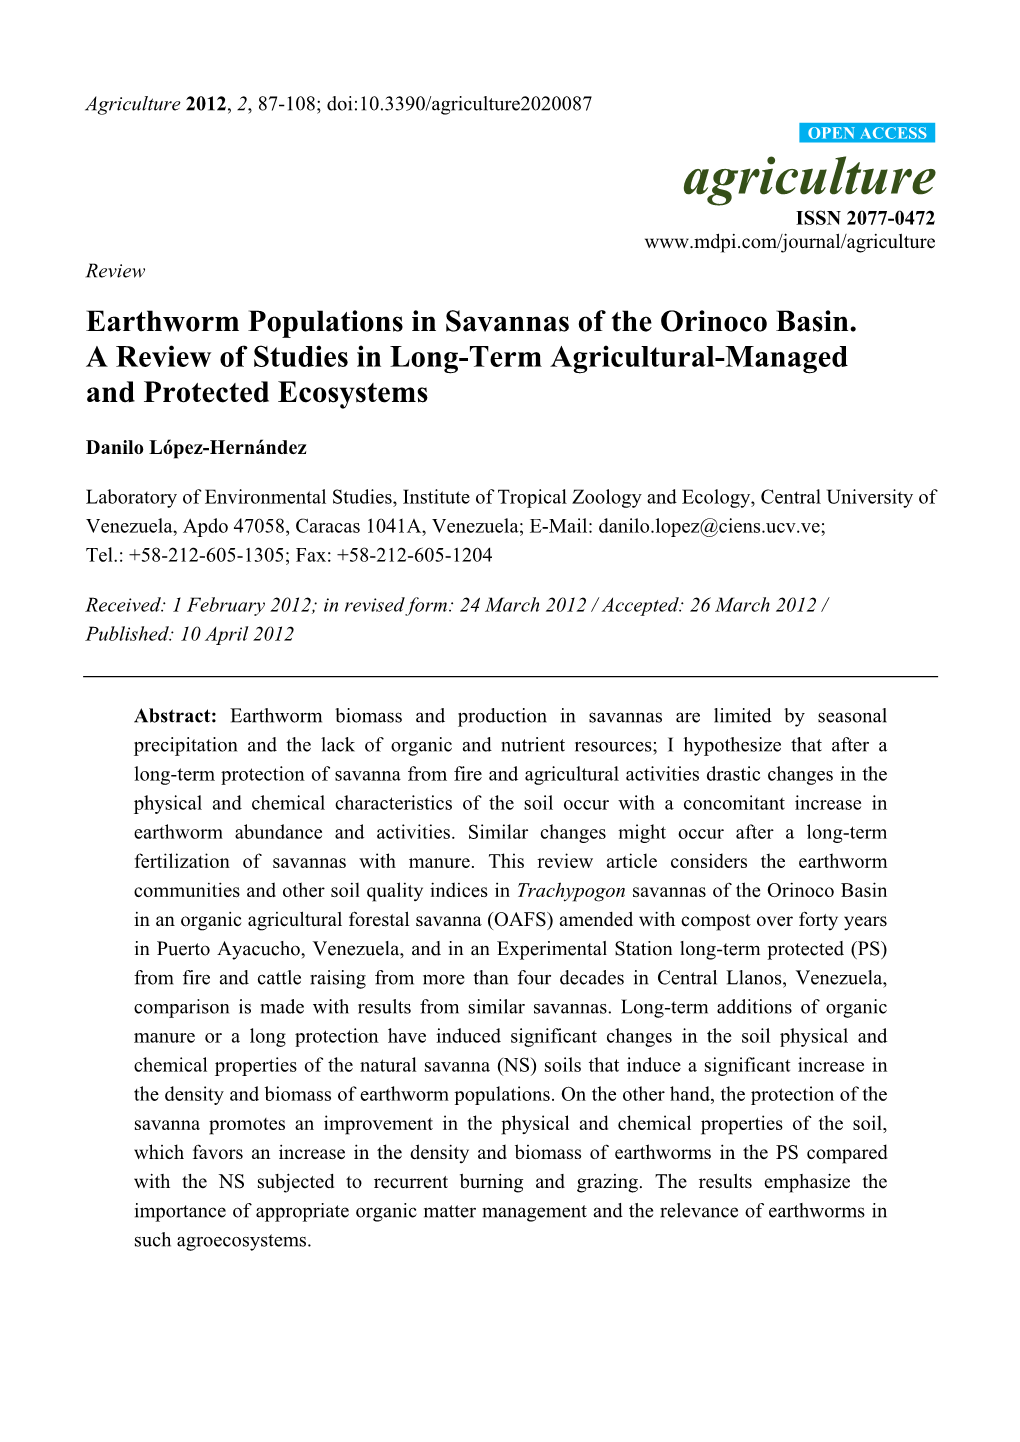 Earthworm Populations in Savannas of the Orinoco Basin. a Review of Studies in Long-Term Agricultural-Managed and Protected Ecosystems